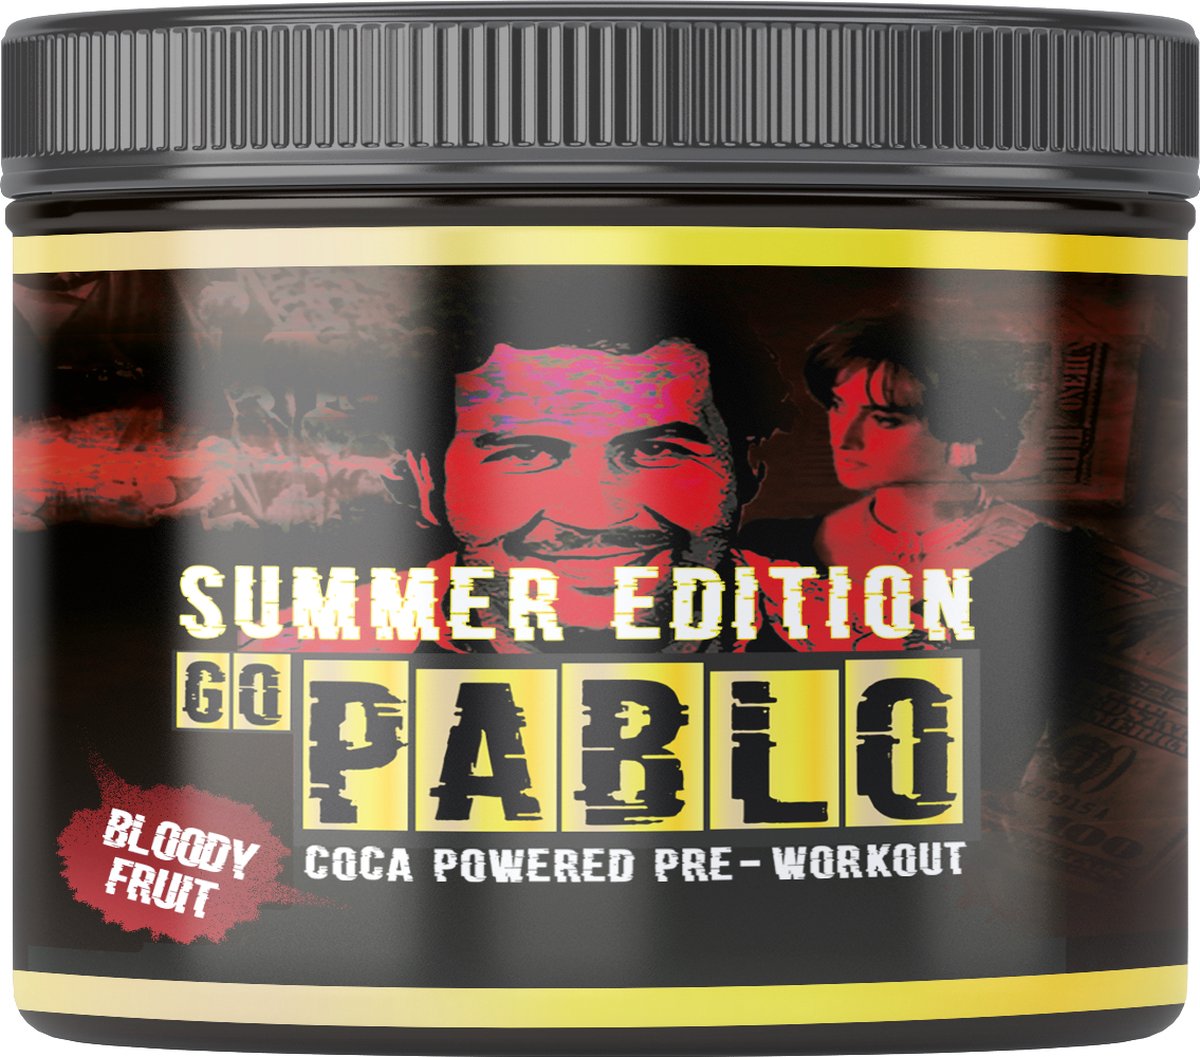 GoPablo Pre-Workout Summer Edition | First Coca Powered Pre Workout In The World | Max 40 doseringen | Go Pablo, Strongest In The Game